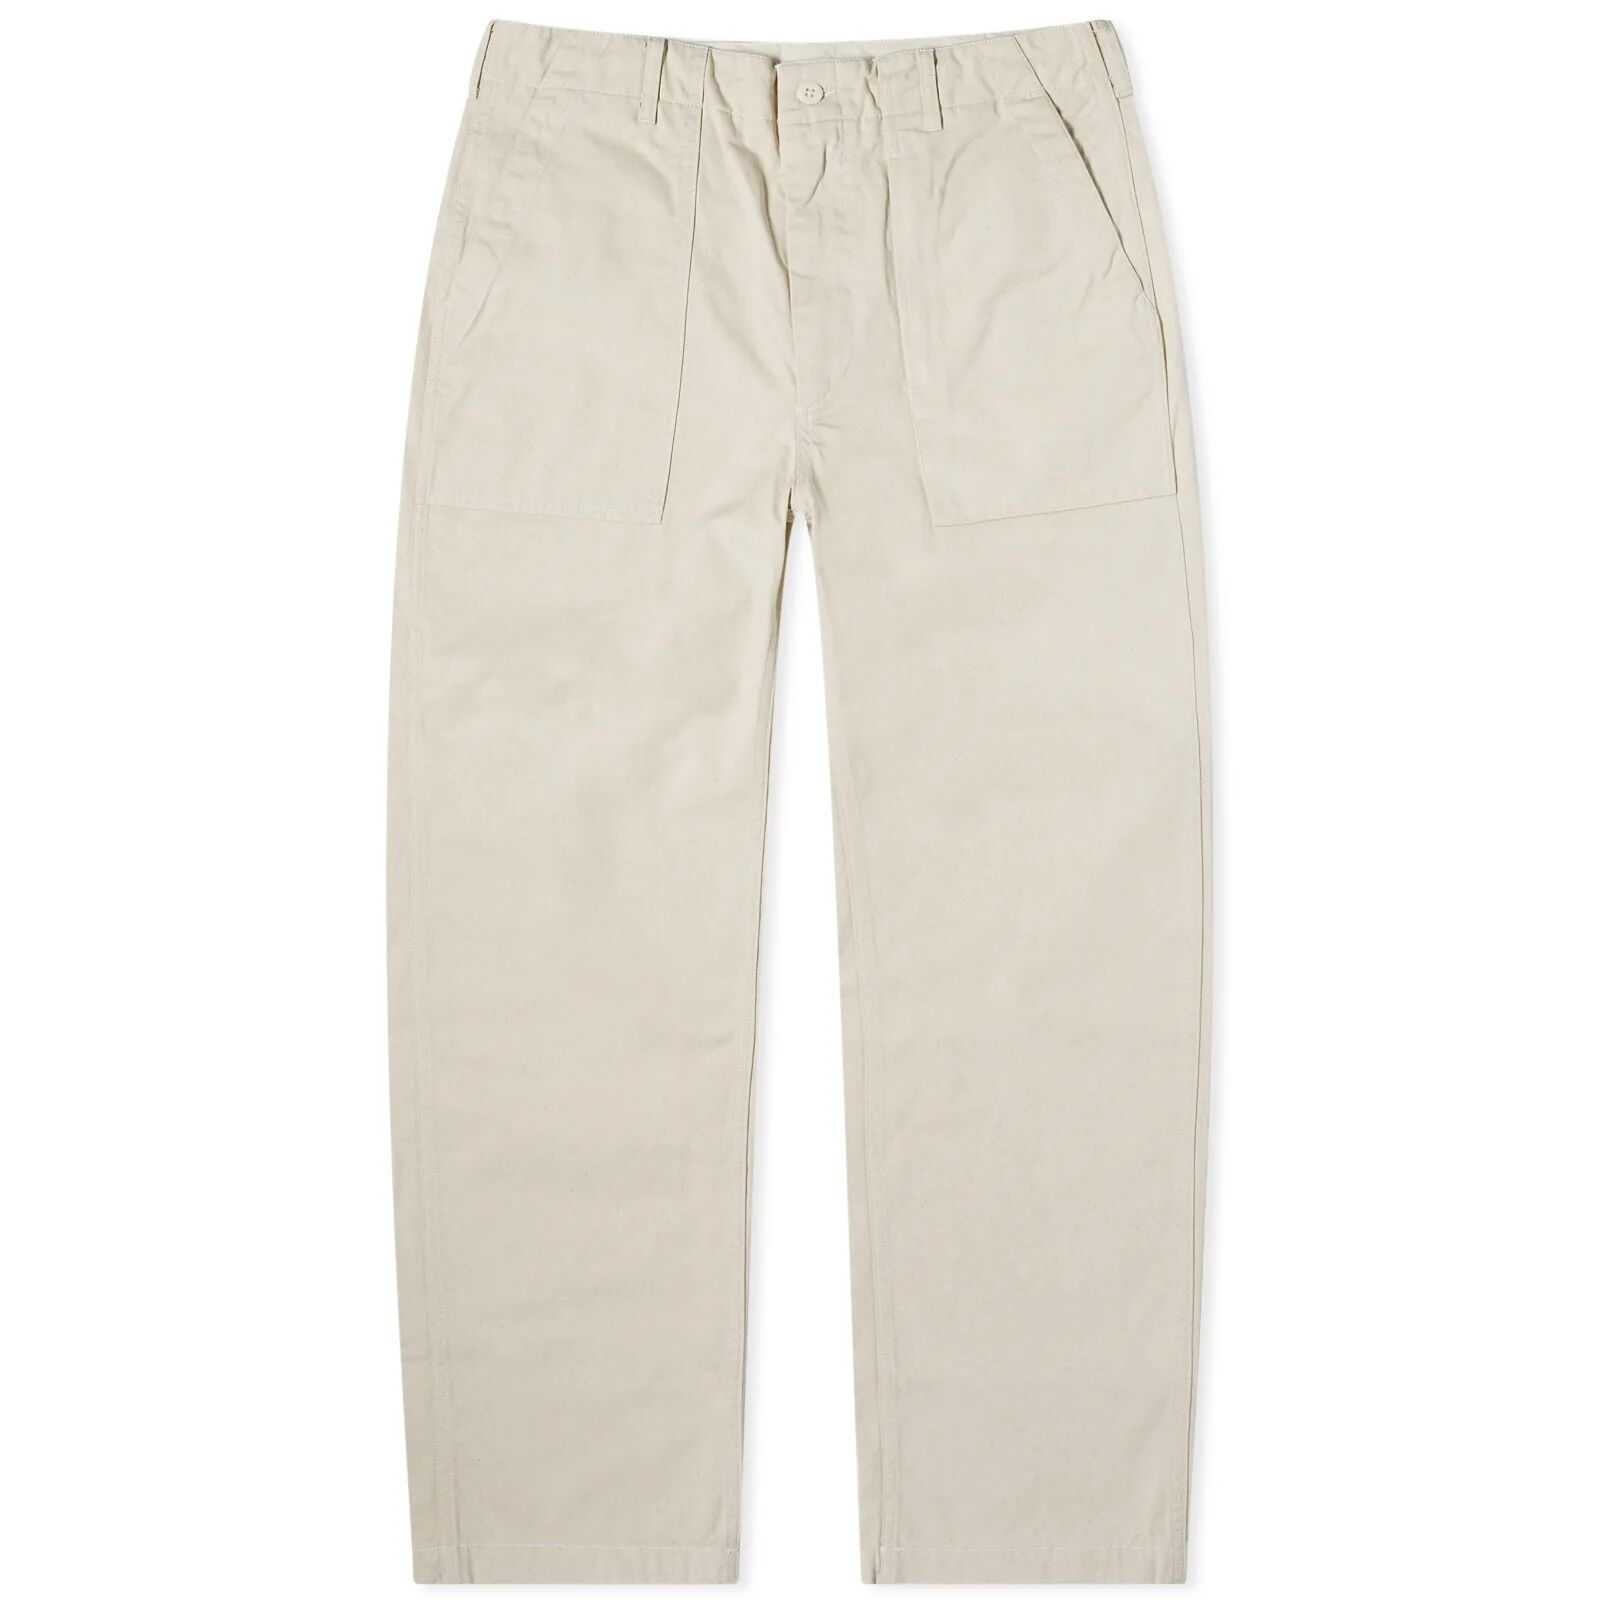 Engineered Garments Men's Fatigue Pants in Natural Chino Twill, Size Large